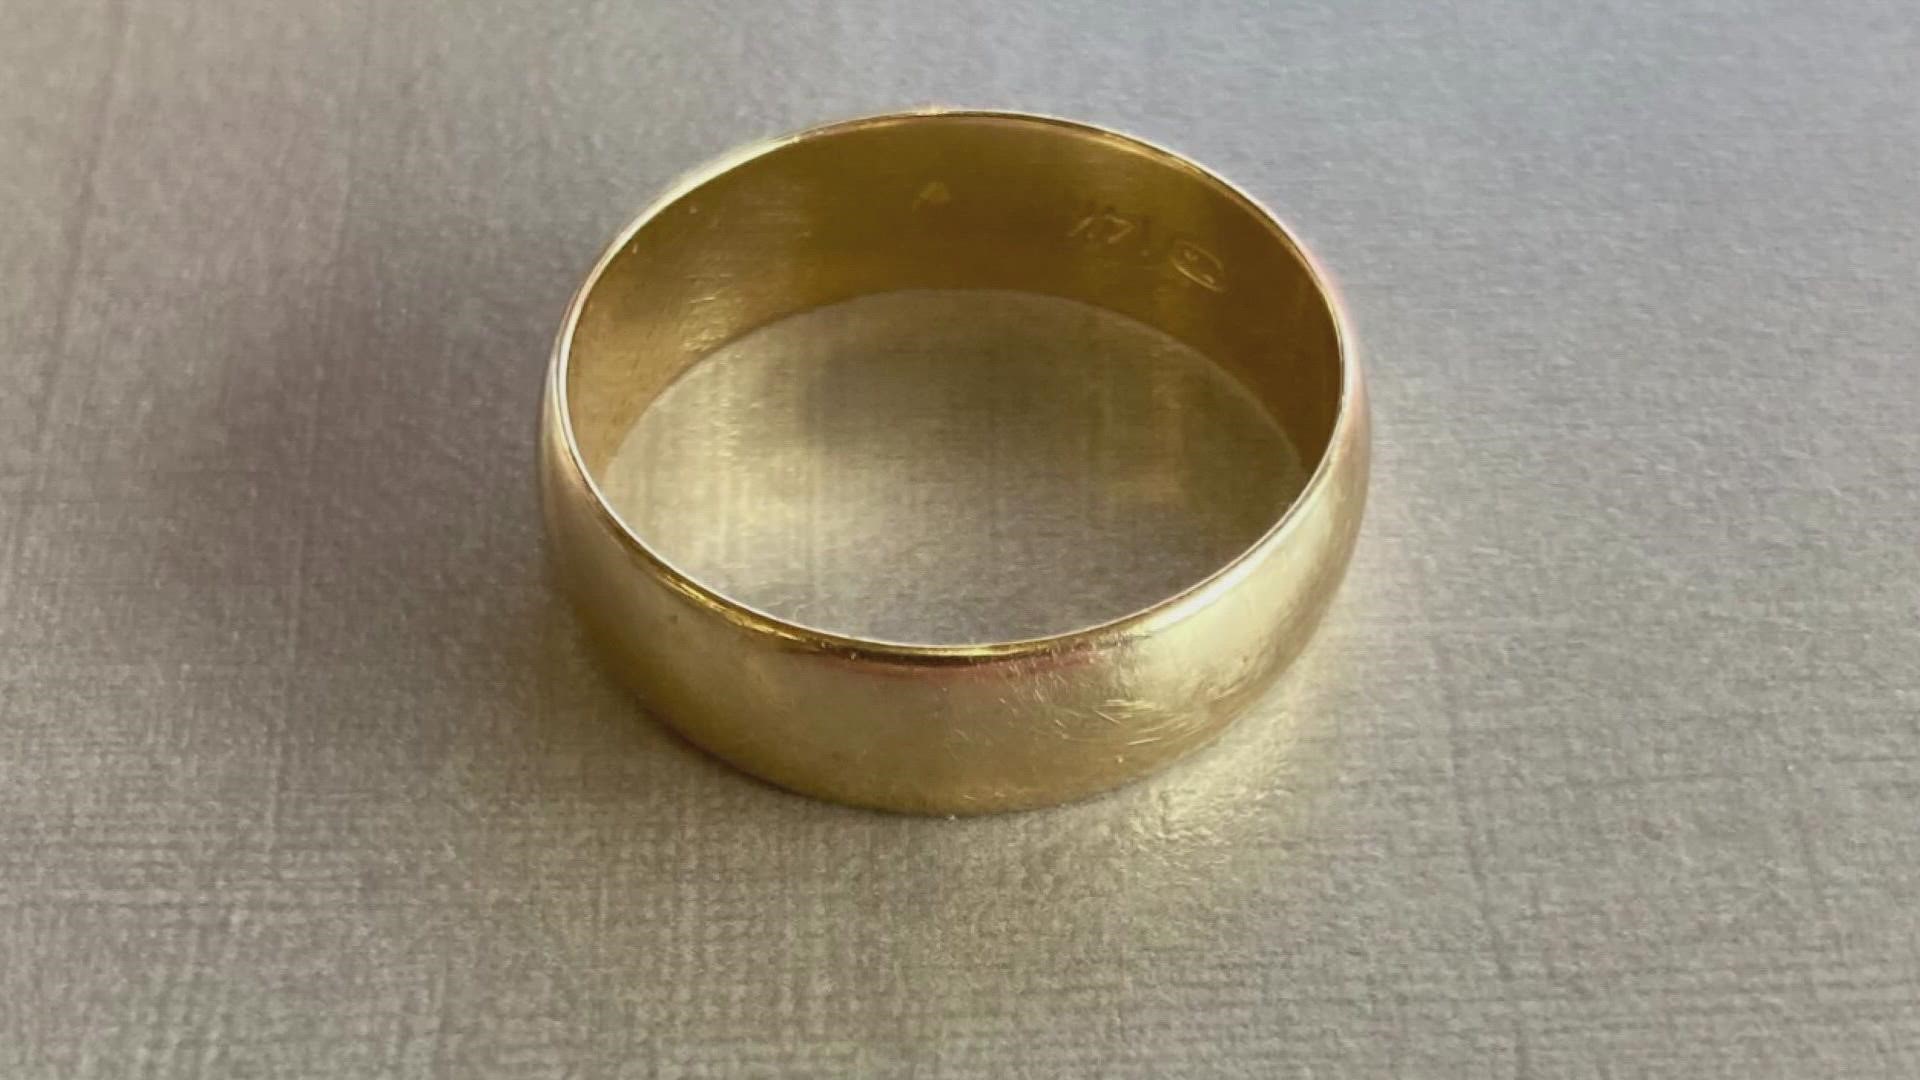 The elderly couple lost the ring at Dairy Queen off Kingston Pike on Thursday afternoon.